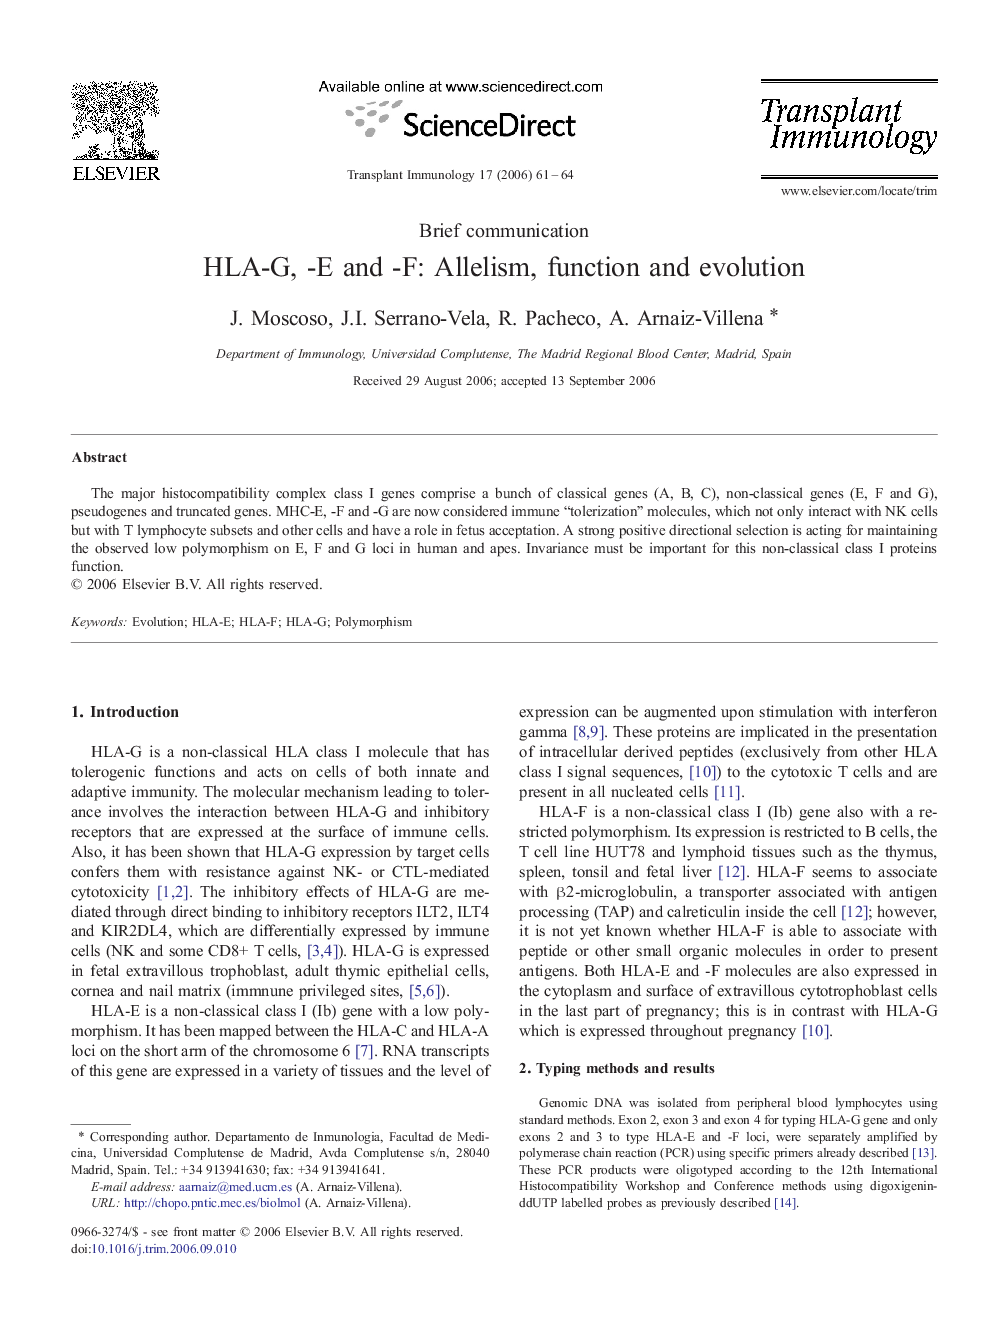 HLA-G, -E and -F: Allelism, function and evolution